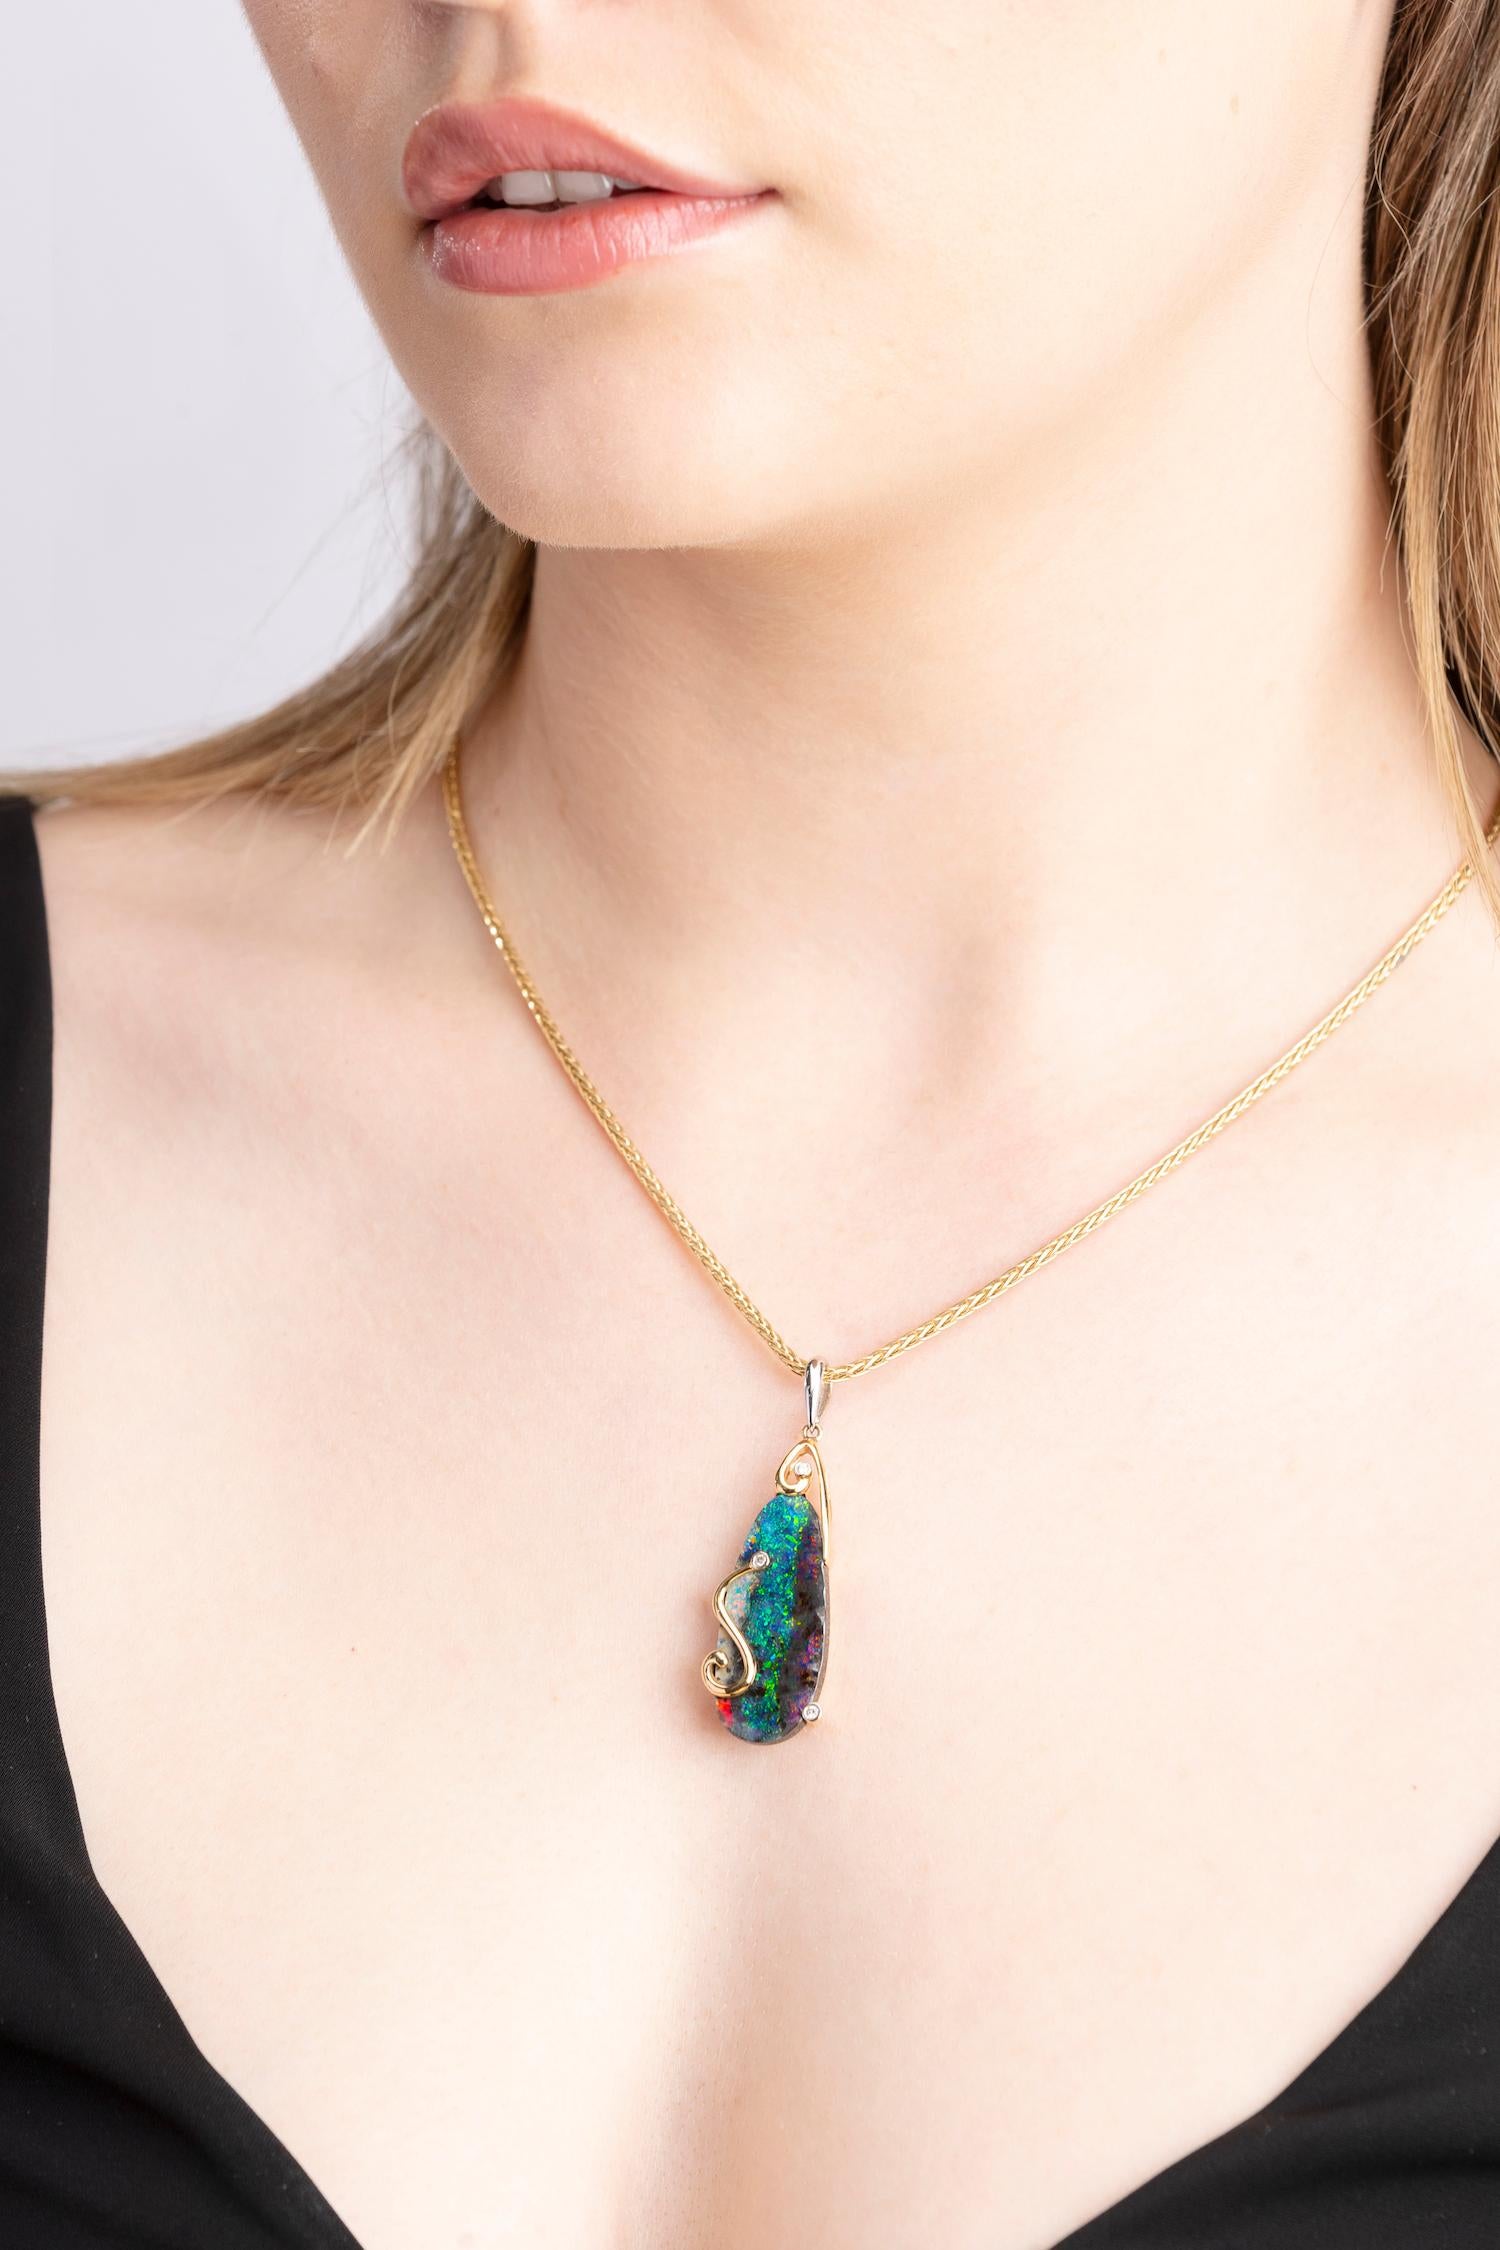 “Sweet Soul” opal pendant expresses opulence and regal elegance featuring a striking boulder opal (19.90ct) sourced from Winton, Australia. Set in our graceful 18K yellow gold with mesmerising diamonds, the elegant blue-green hues in the gemstone